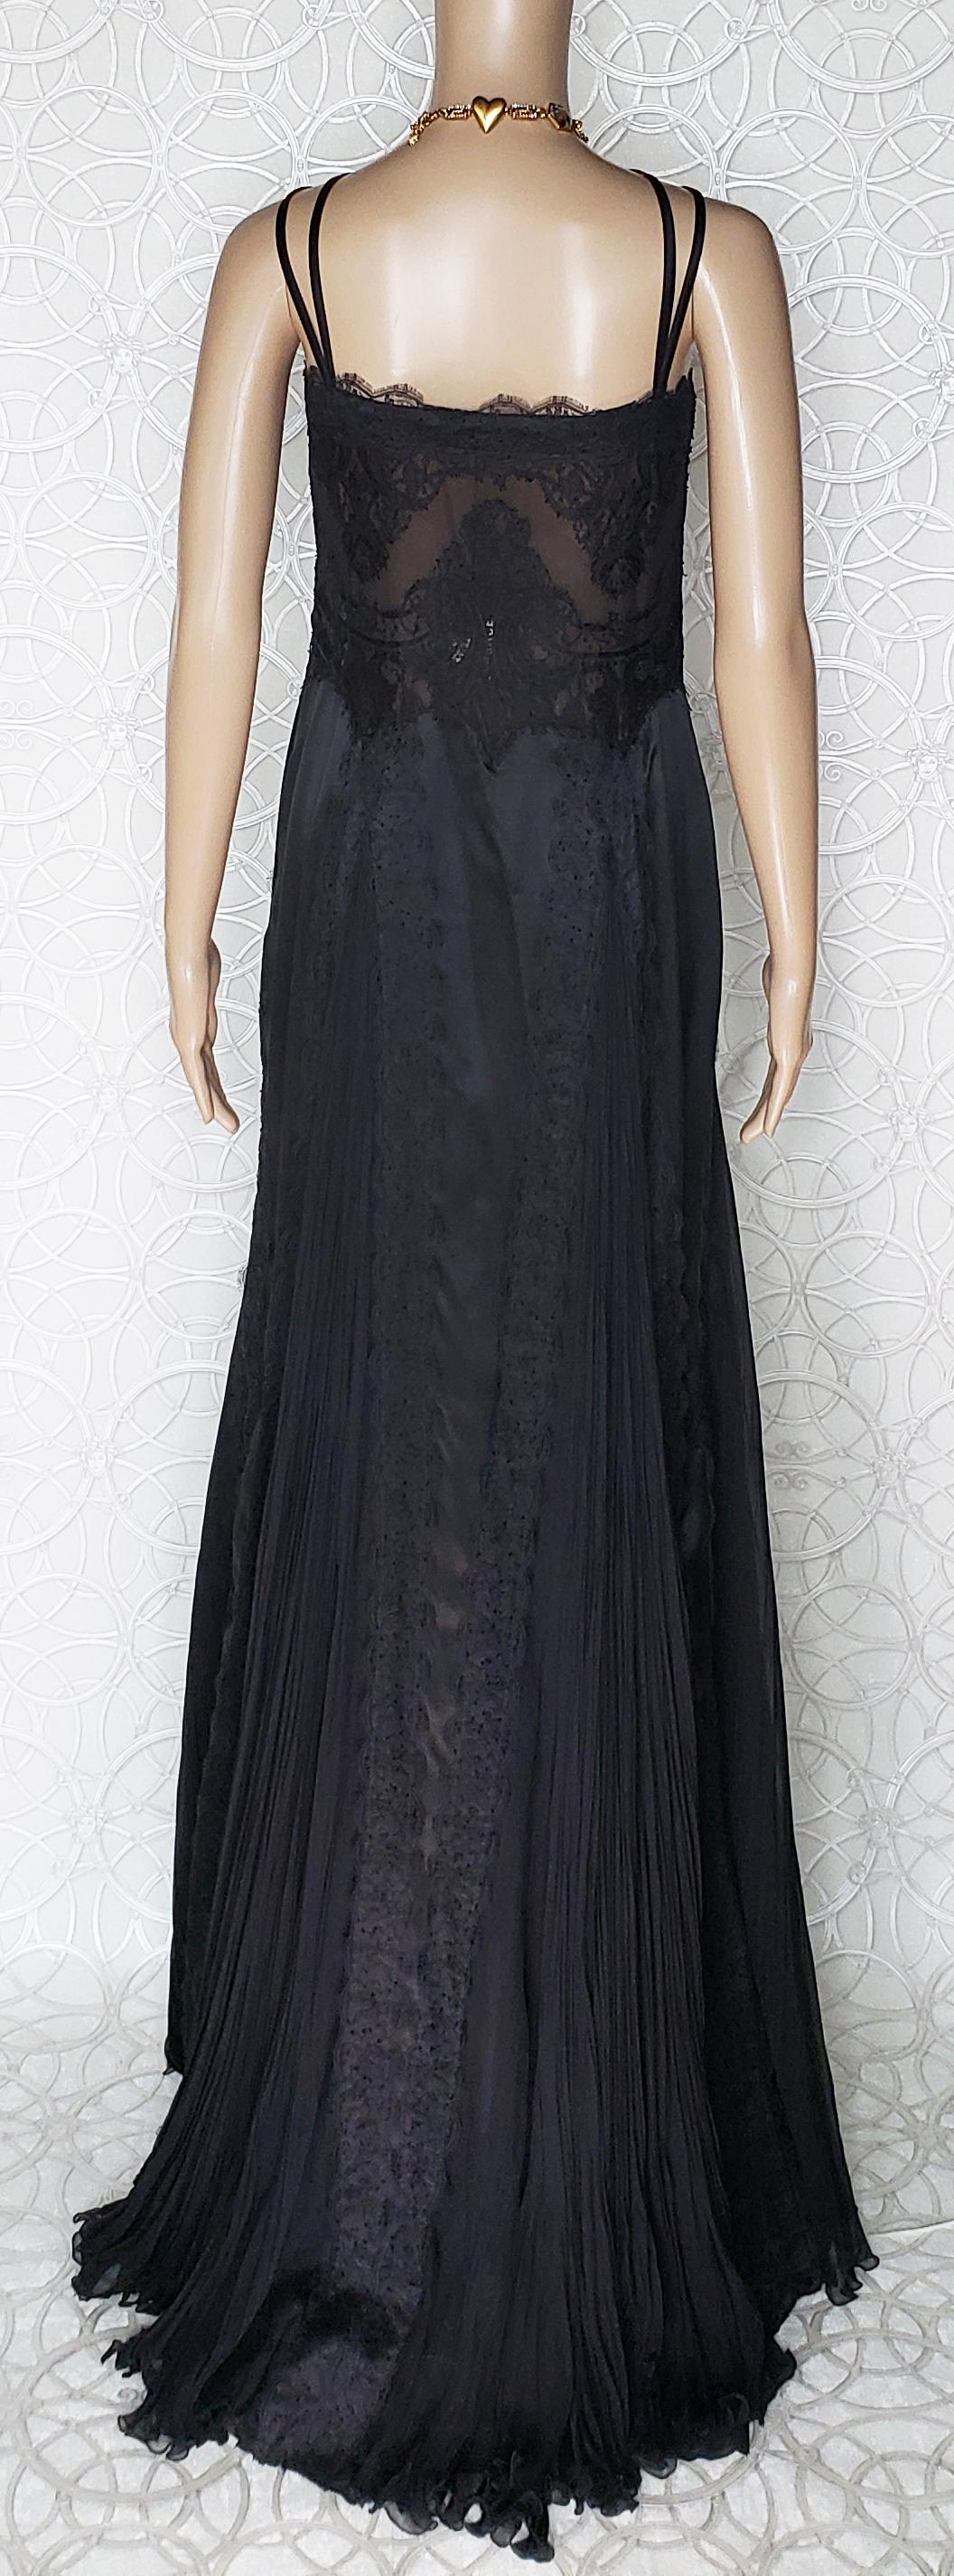 Fall 2003/2004 VINTAGE VERSACE BLACK SILK DRESS GOWN W/SHEER LACE Bodice  For Sale 2